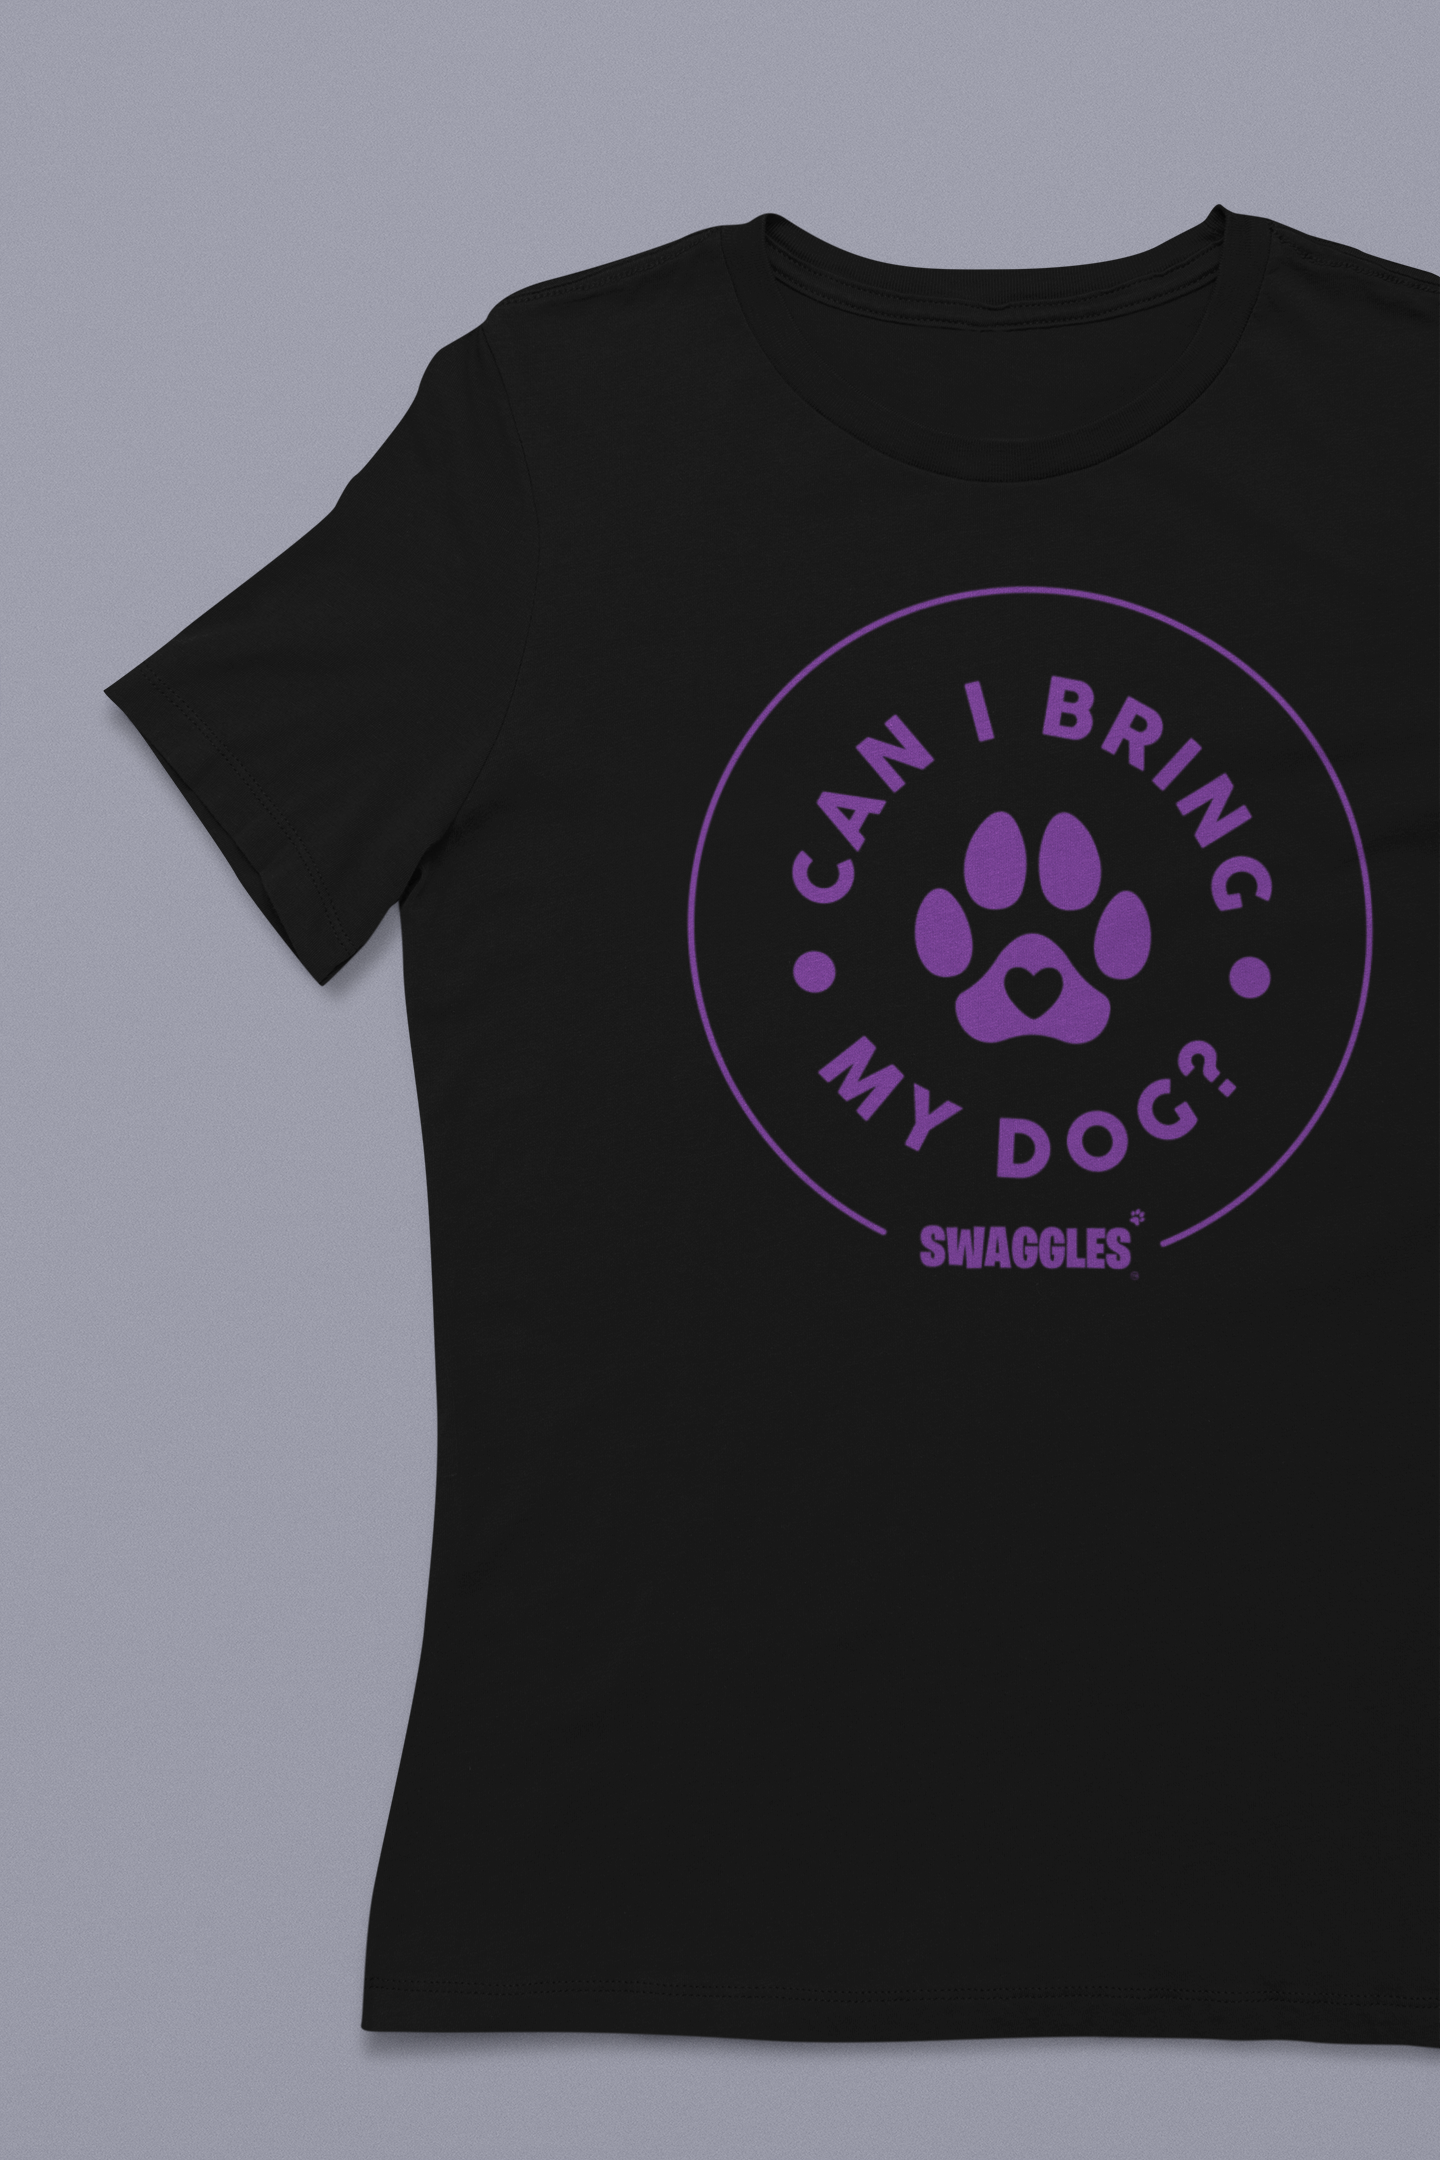 "Can I Bring My Dog?" - Paw Design - Women's Crew Neck Tee